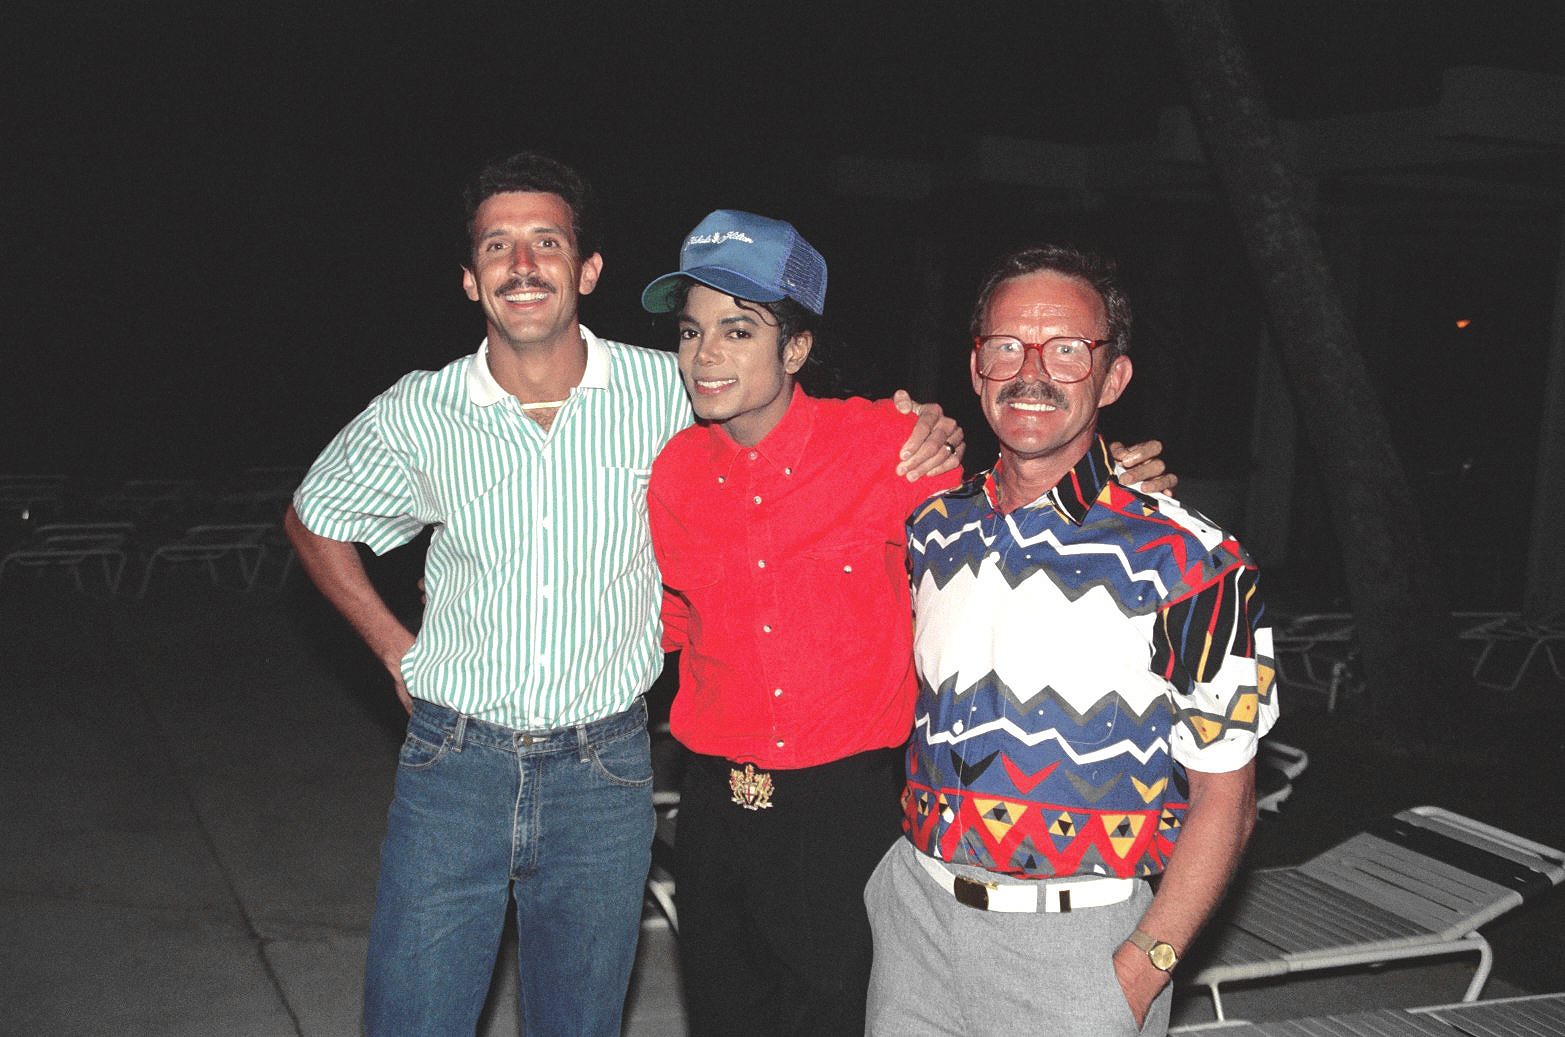 Michael Jackson posing with his fans